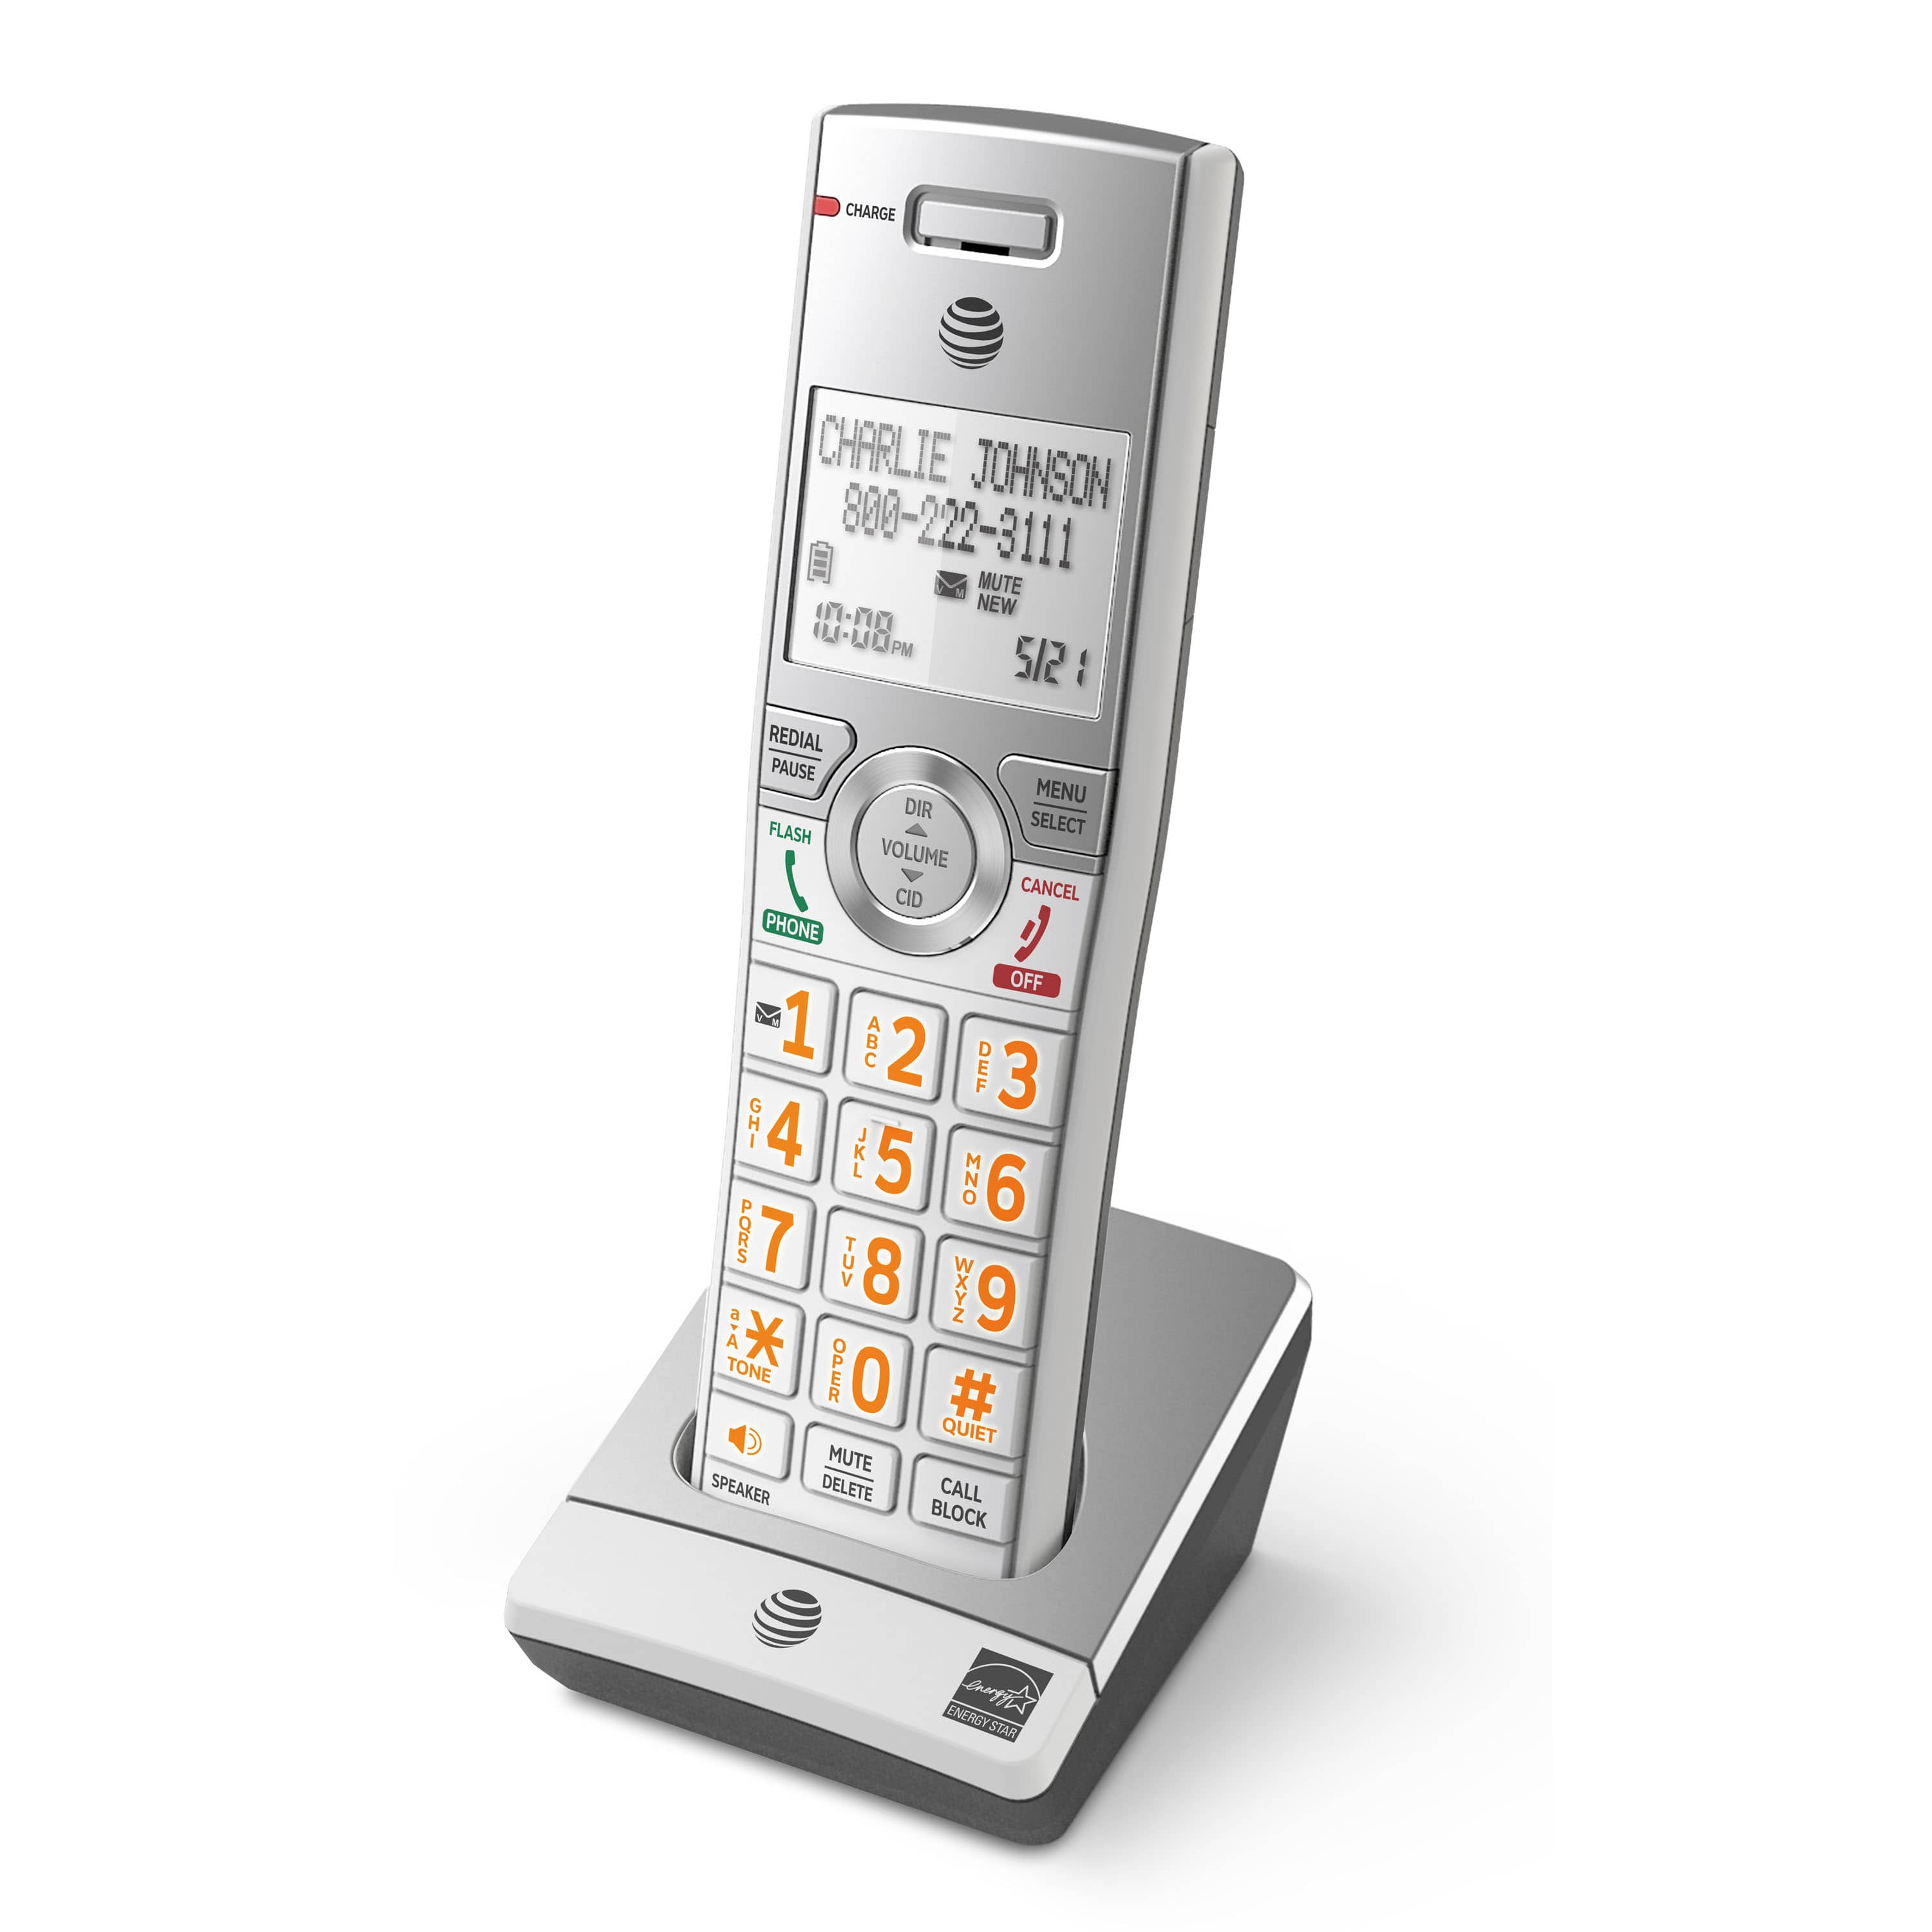 6 handset phone system with smart call blocker - view 7